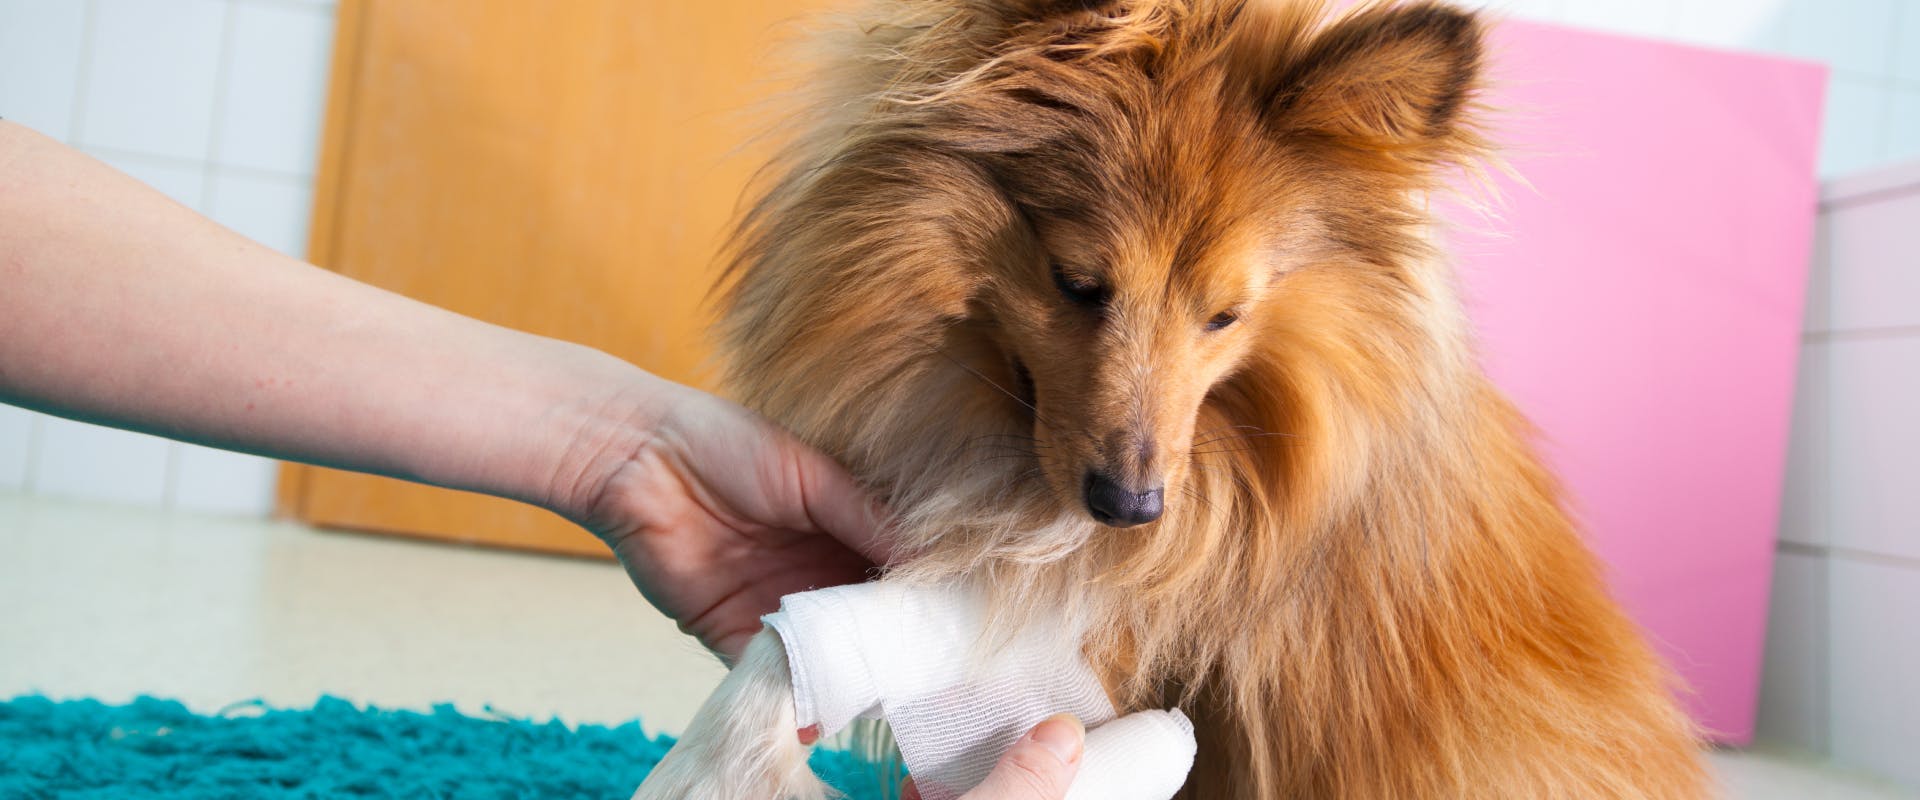 a young sheltie having one of its front legs wrapped in a bandage